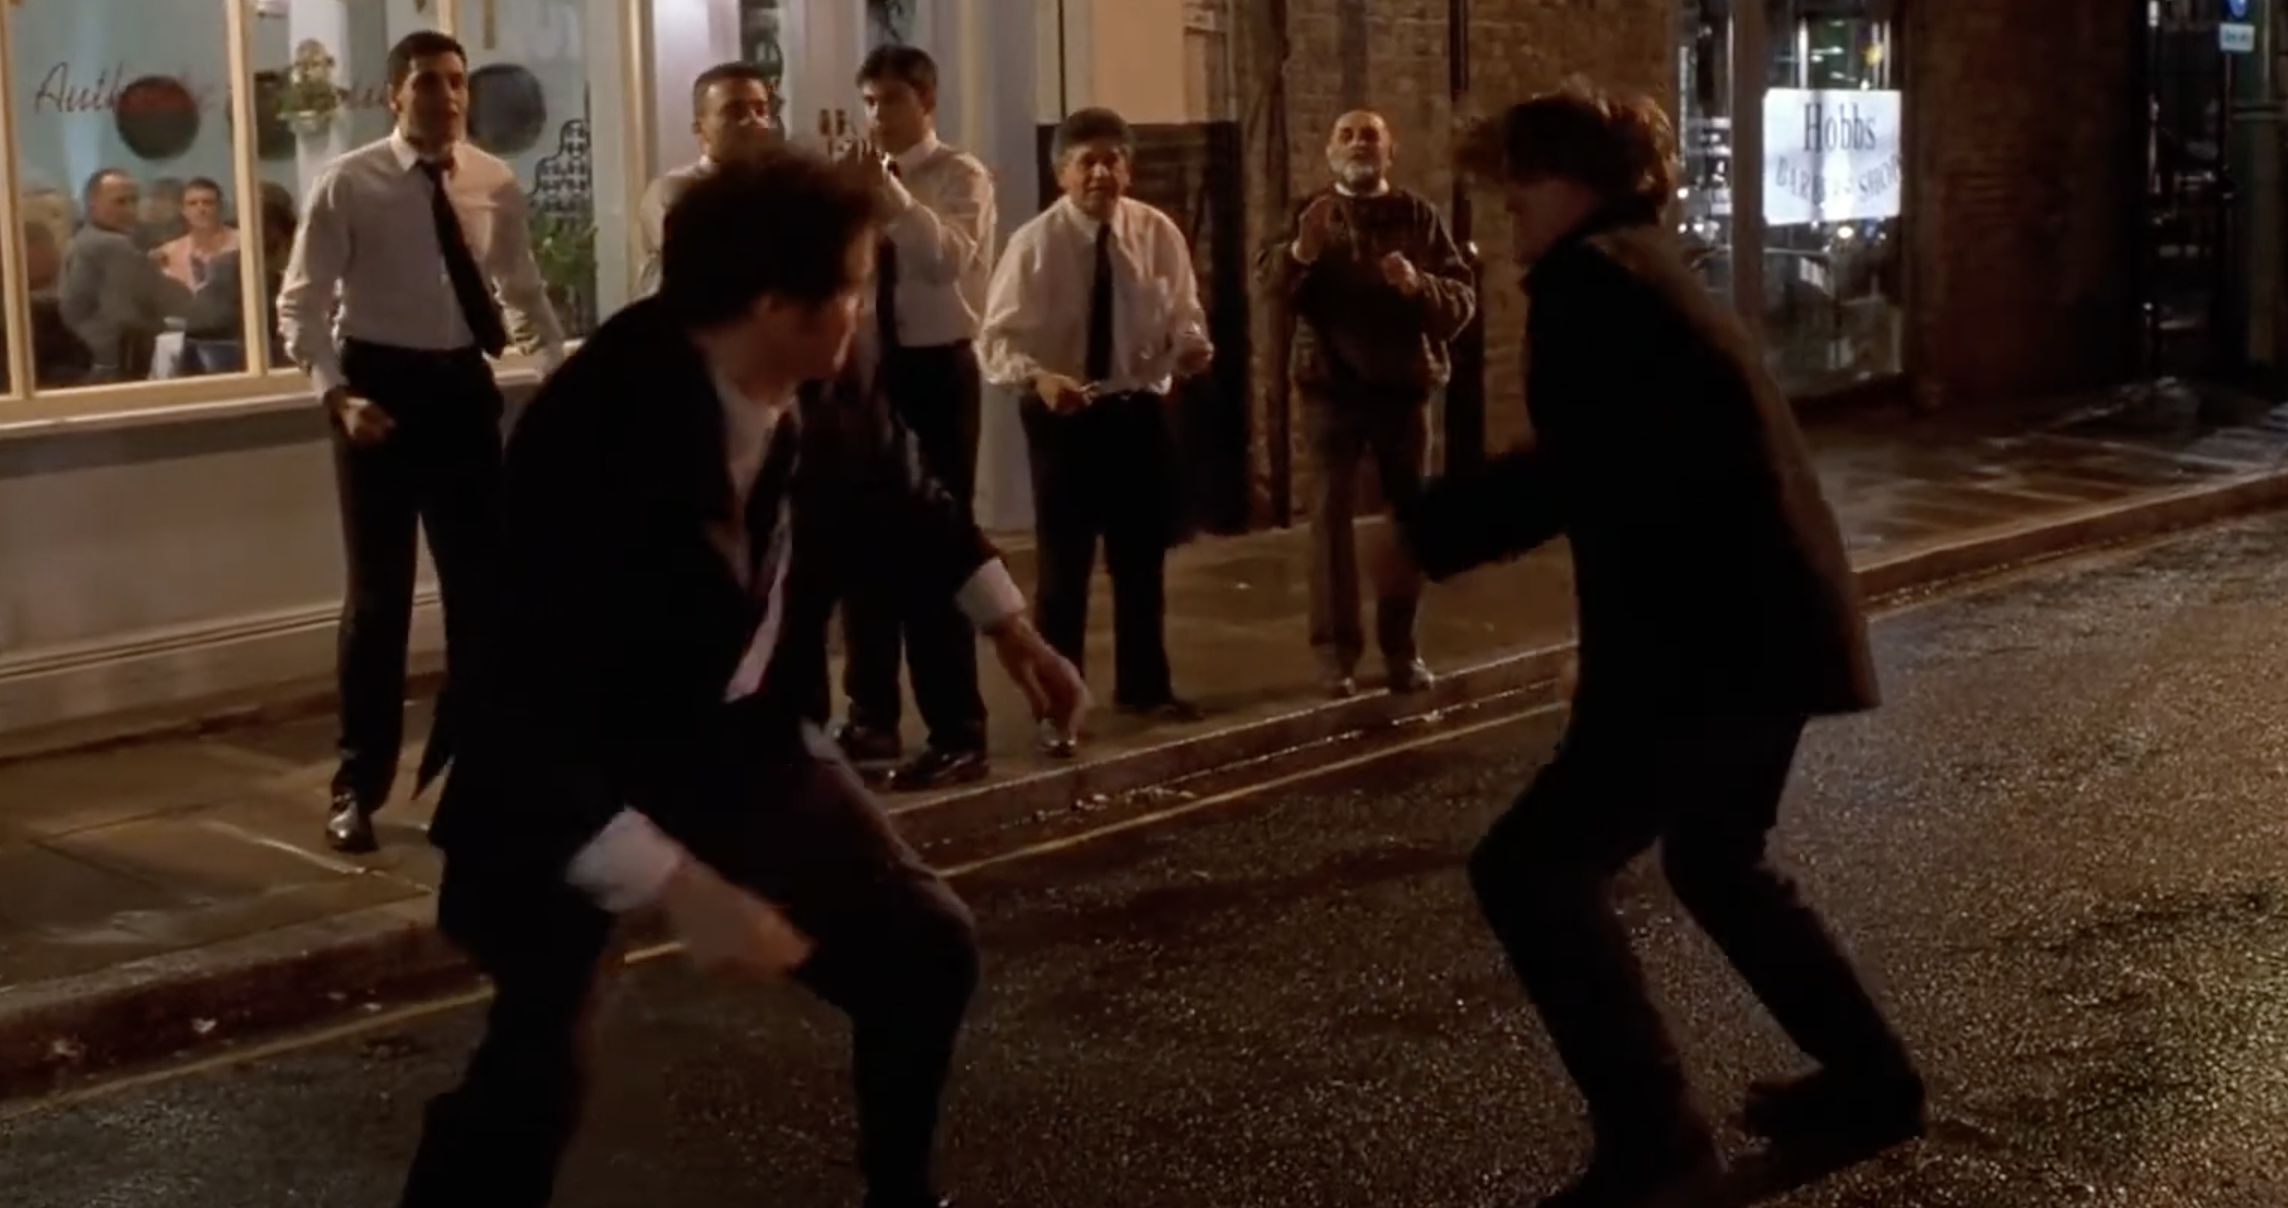 colin firth and hugh grant in the street facing each other ready to fight with people watching